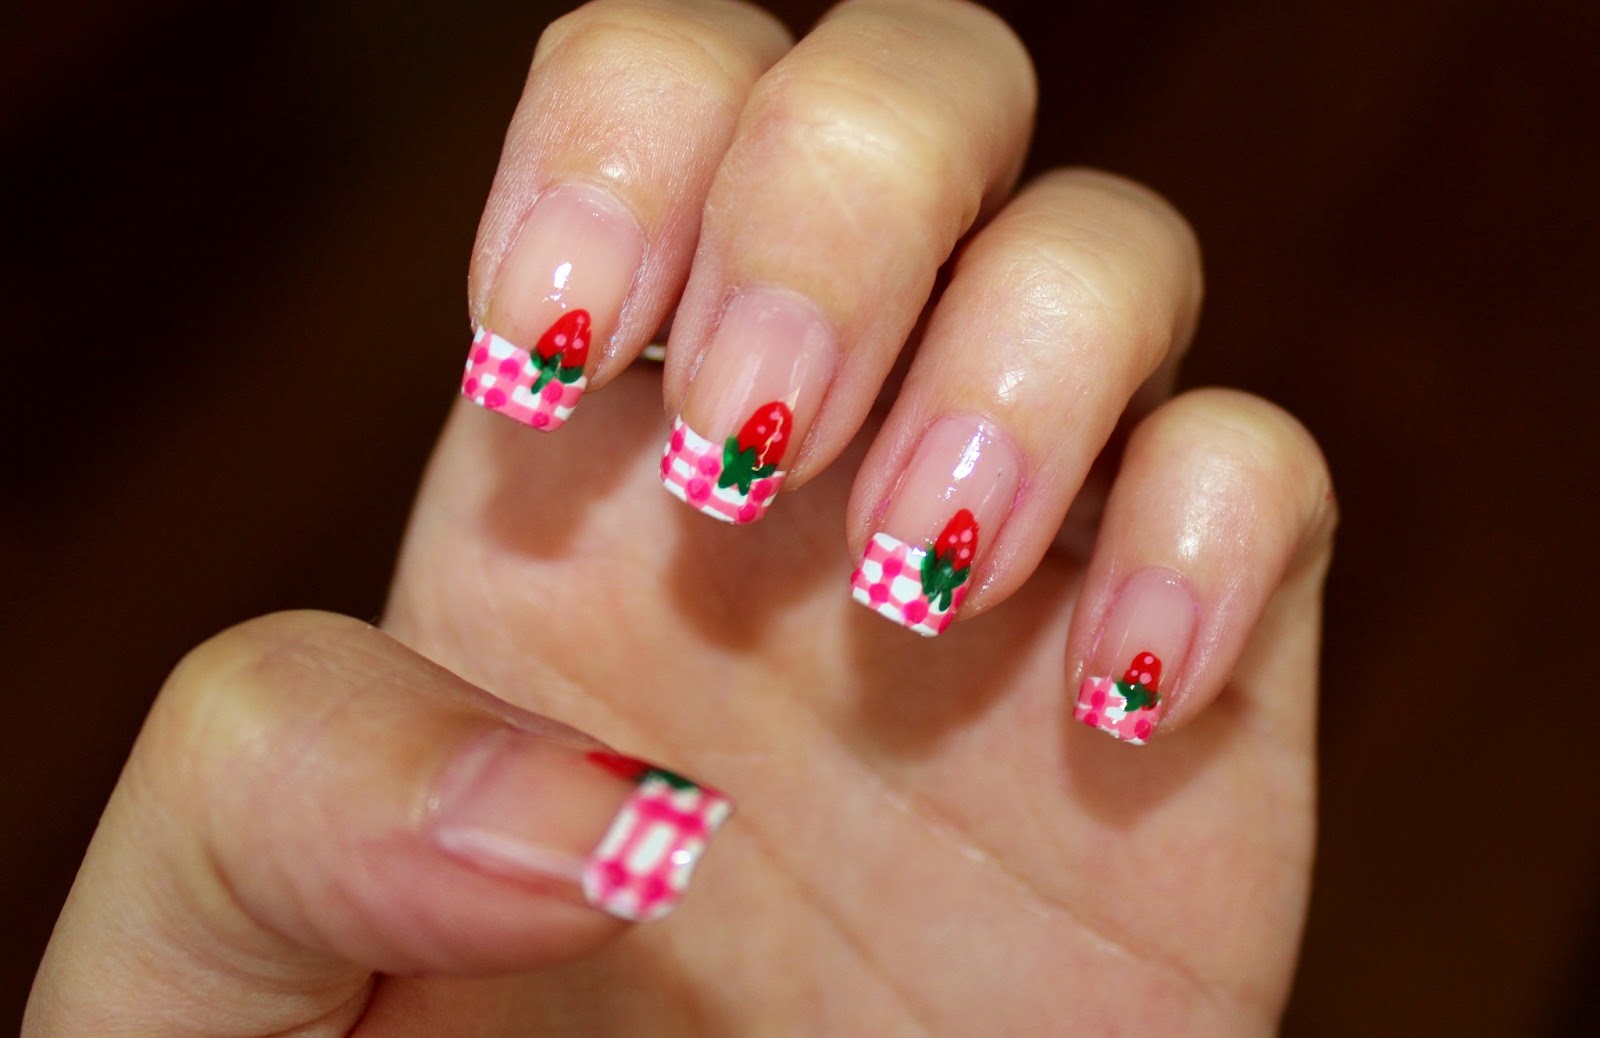 Strawberry Nail Art Tutorial for Short Nails - wide 6